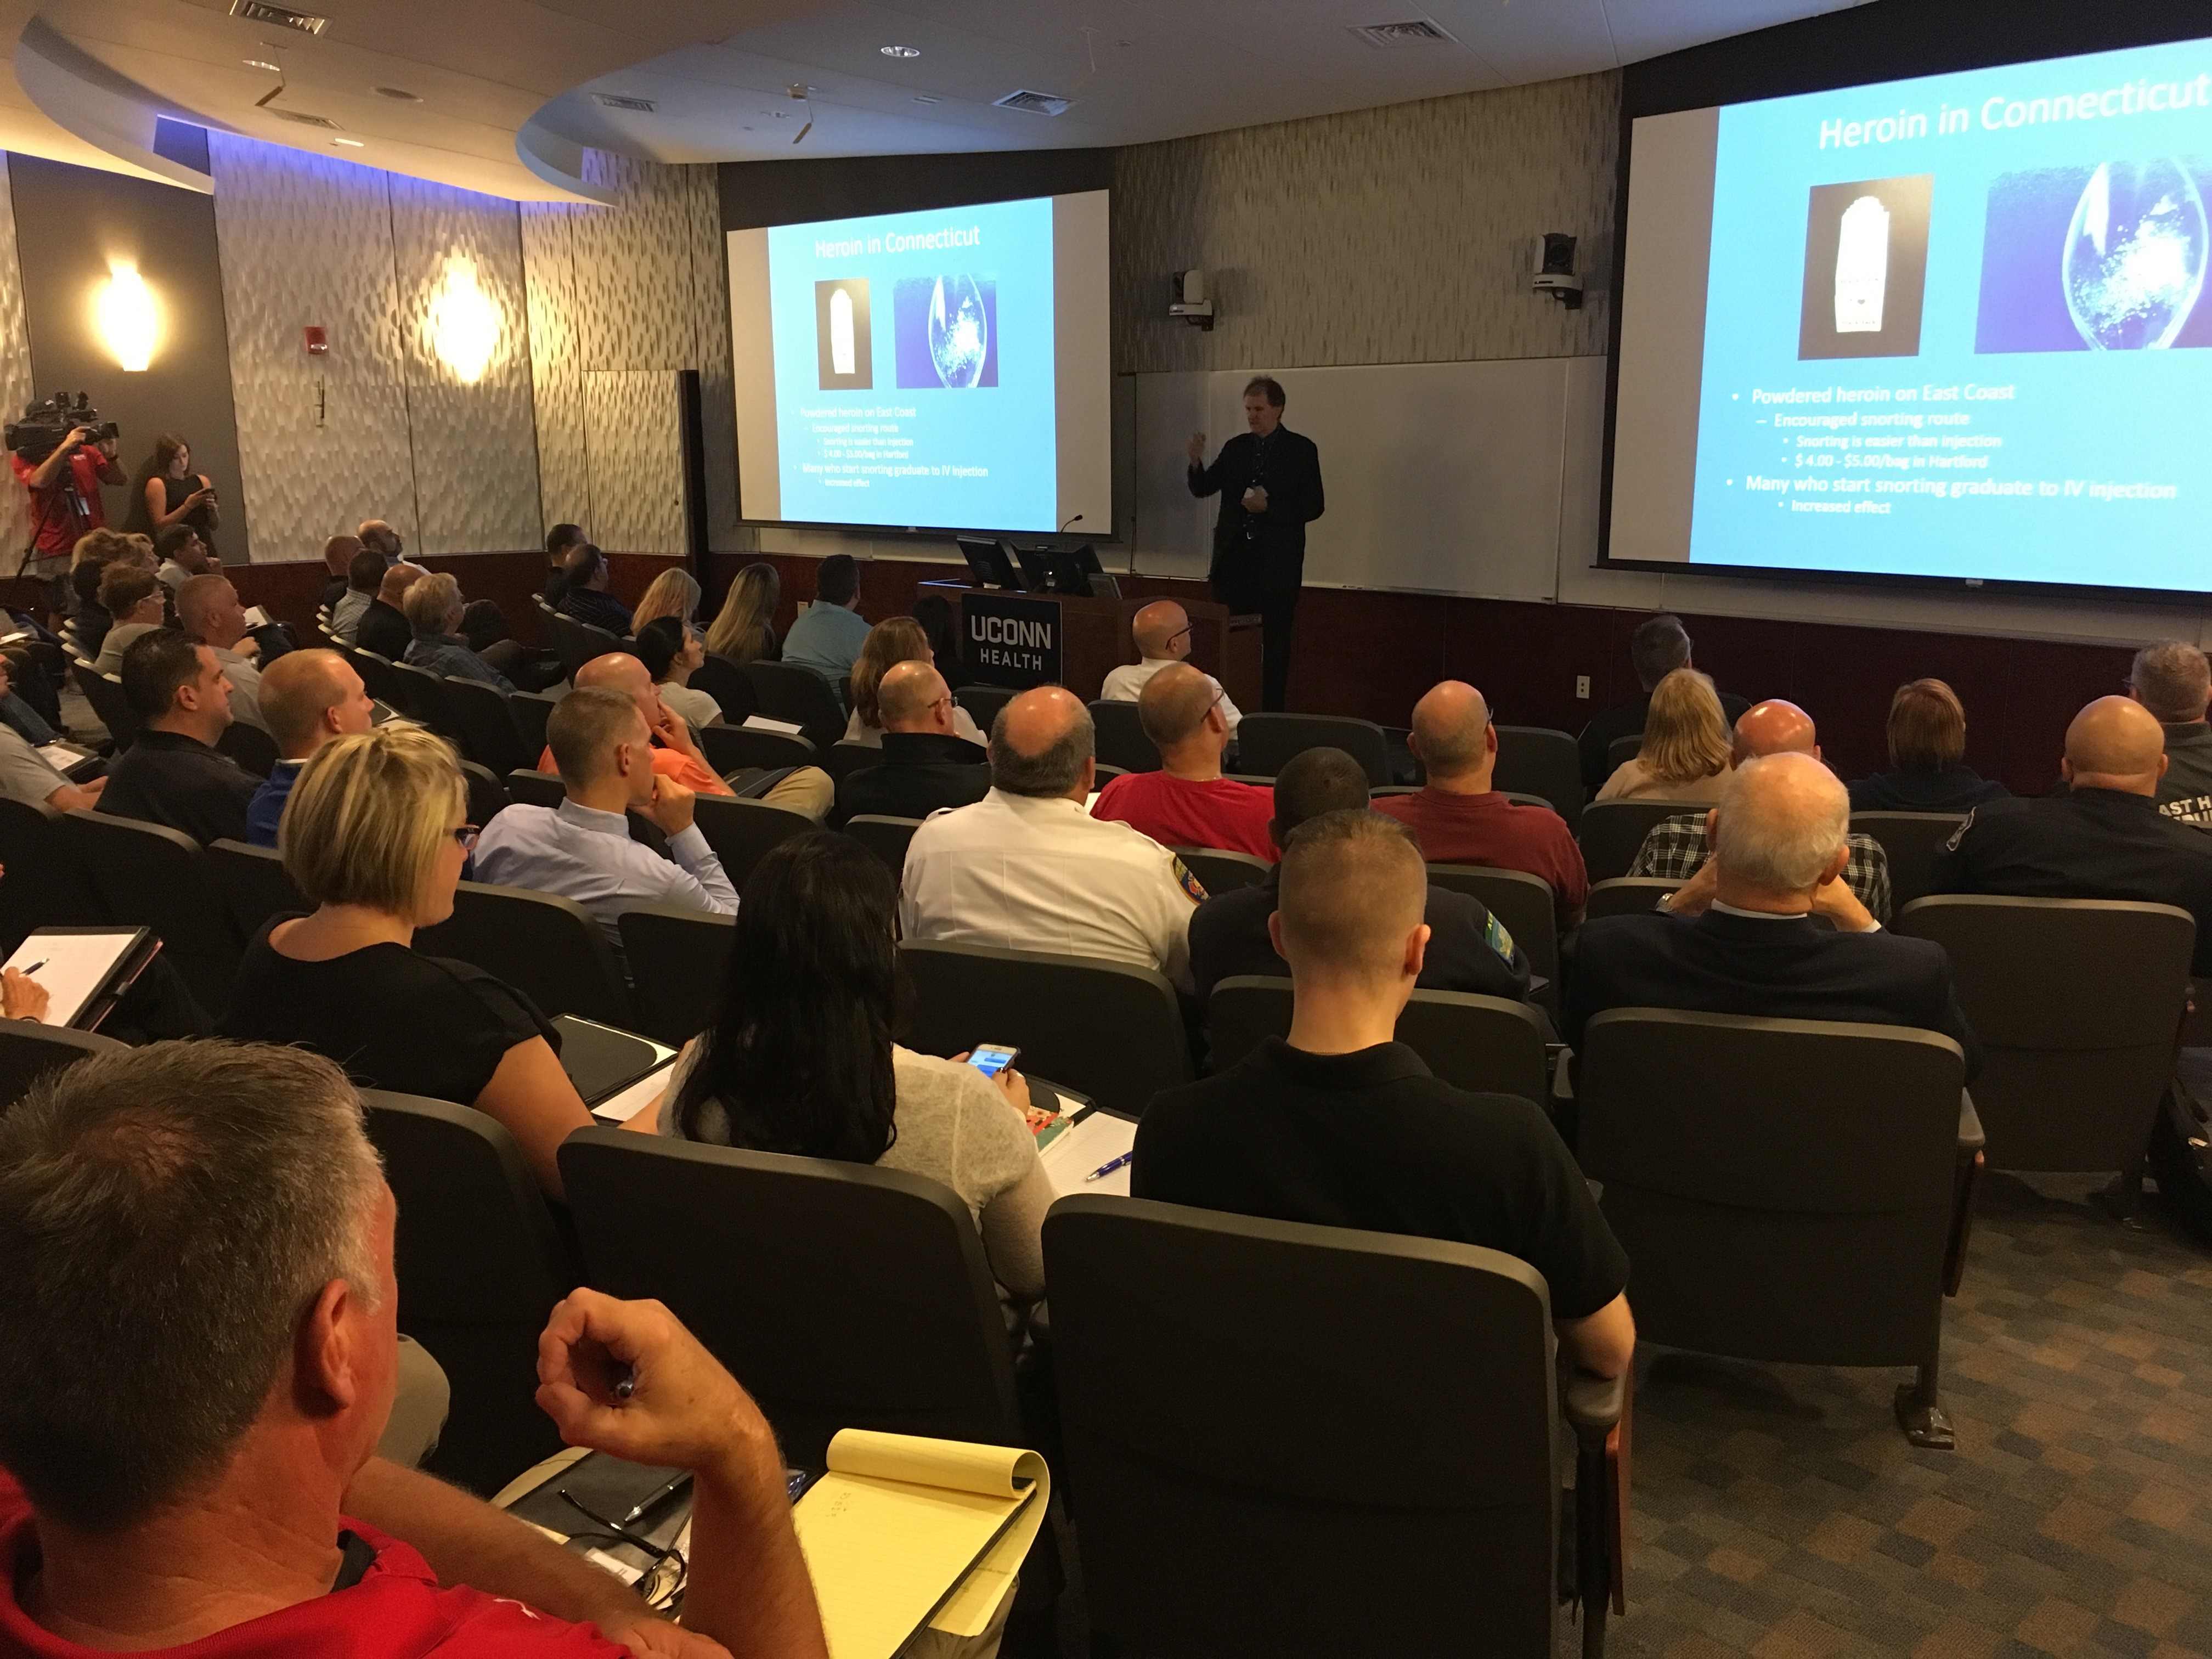 UConn Health EMS Coordinator, Peter Canning, addressing the more than 100 experts attending the statewide forum examining ways to stop the growing opioid epidemic in Connecticut (UConn Health Photo).